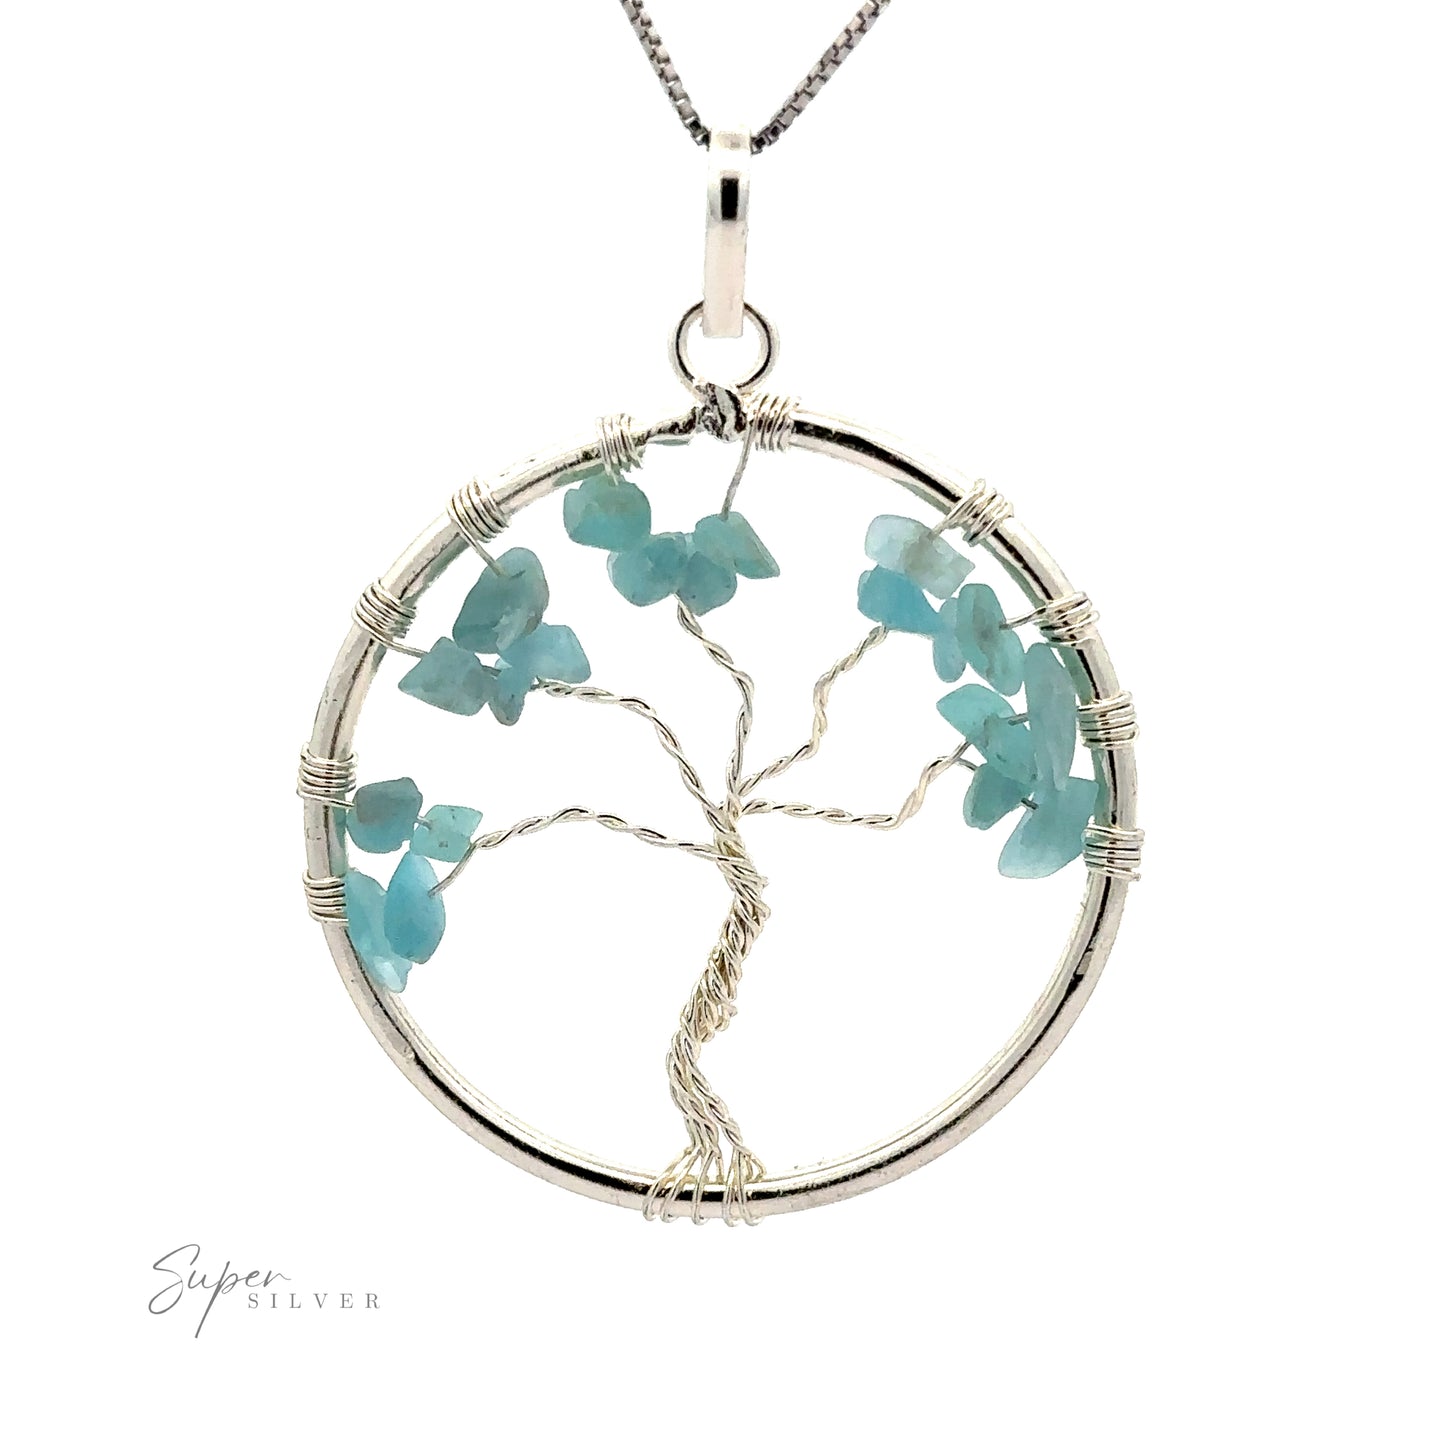 
                  
                    A Wire Wrapped Tree of Life Pendant with Stones in the shape of a tree with blue stone leaves, attached to a chain. The tree is crafted out of wire within a circular frame, showcasing intricate wire wrapped design. The text "Super Silver" appears at the bottom left.
                  
                